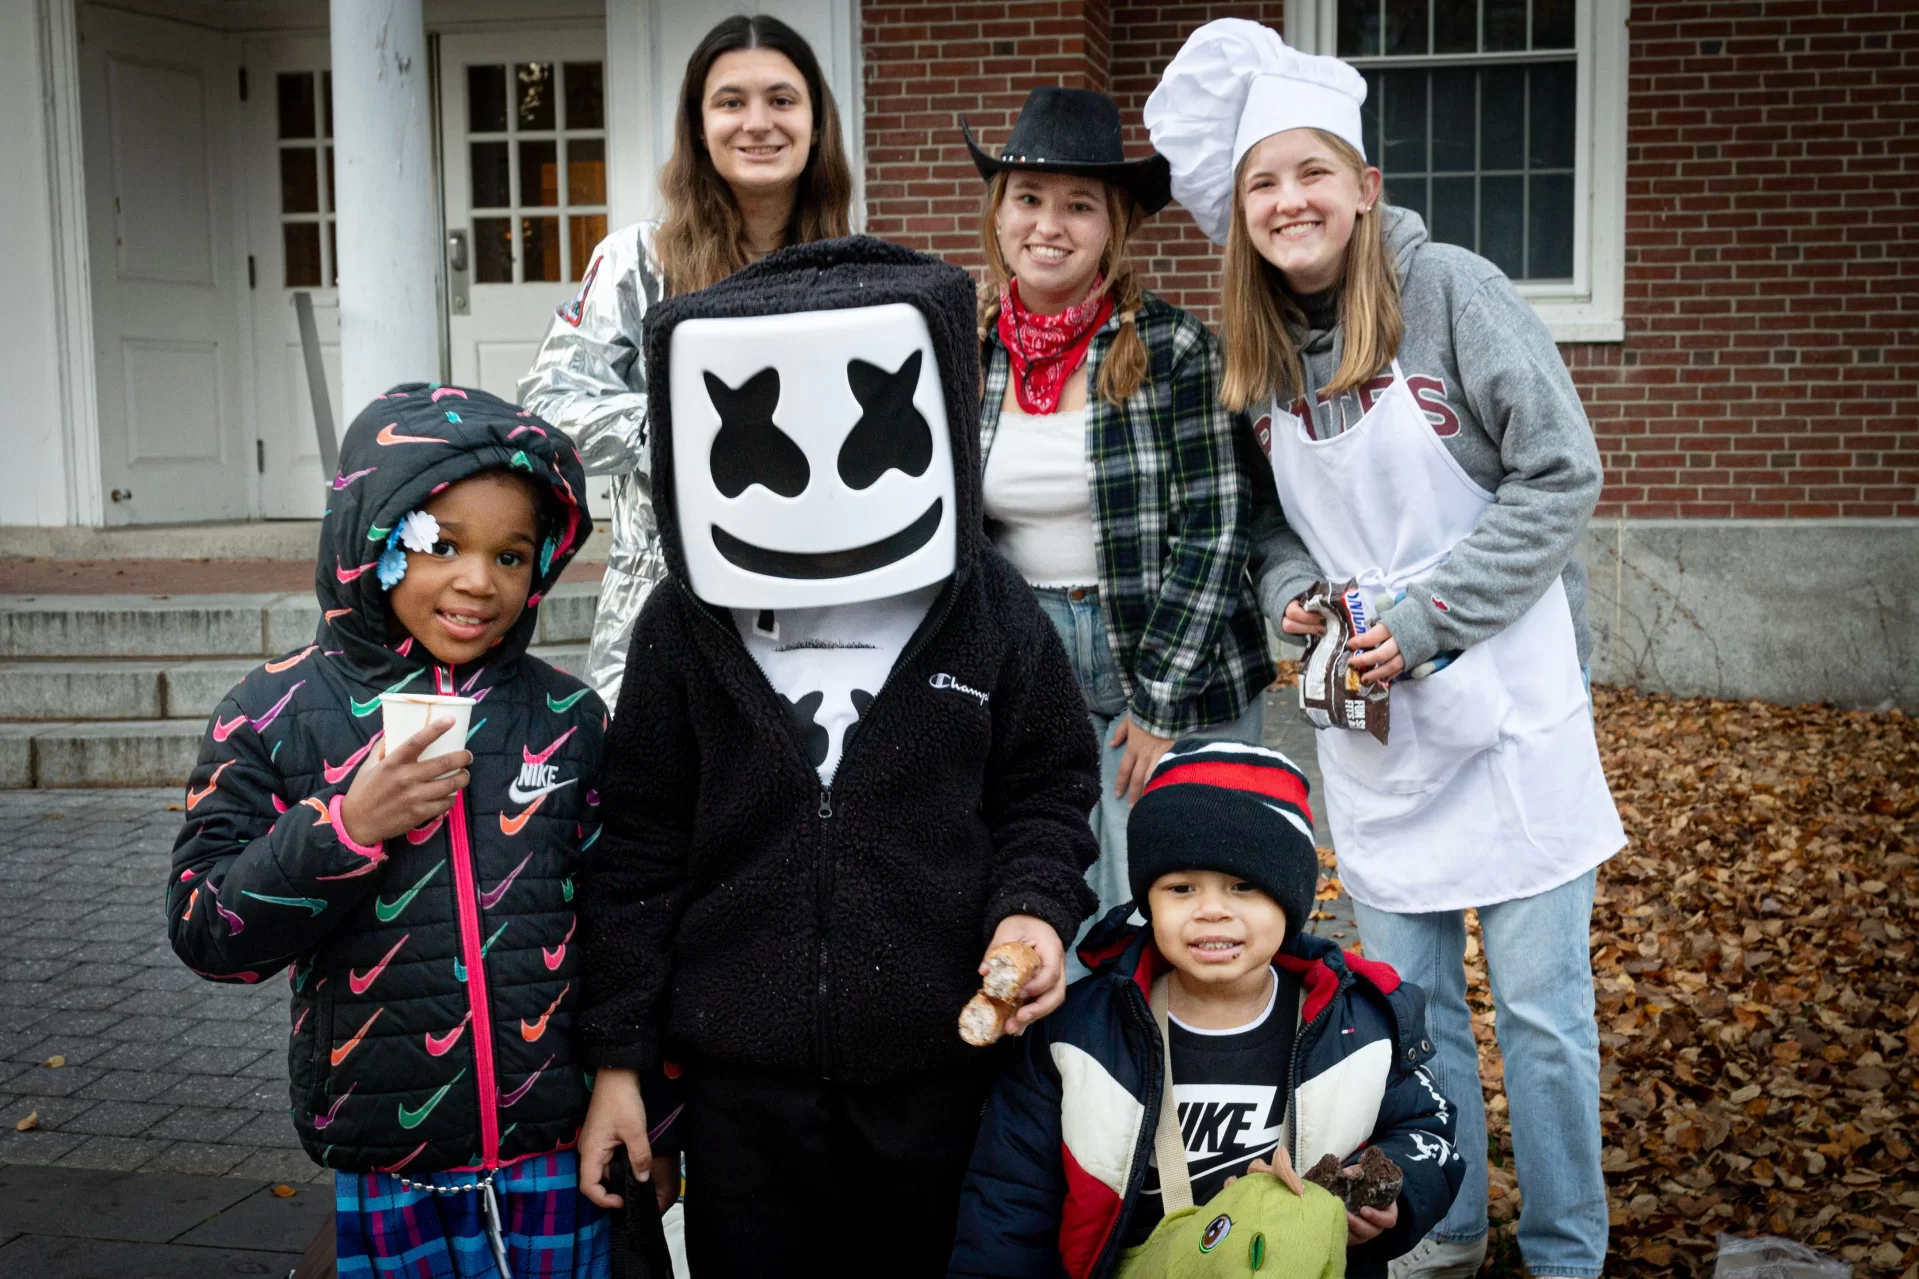 Last night was a sweet treat.

The kids had an absolute blast and we think the trick-or-treaters had fun too. Thanks to the @batesharward Center, the City of Lewiston (@officiallewistonme), and The American Red Cross for helping us host such a special event for our community. We could see on our students' faces how healing it was to help bring some joy to our beloved city and home.


President Garry W. Jenkins and his husband Jon Lee also joined in on the fun helping Bates students hand out the many pieces of candy made available at the event.

We also want to thank all the families for coming out and sharing your Halloween with us.